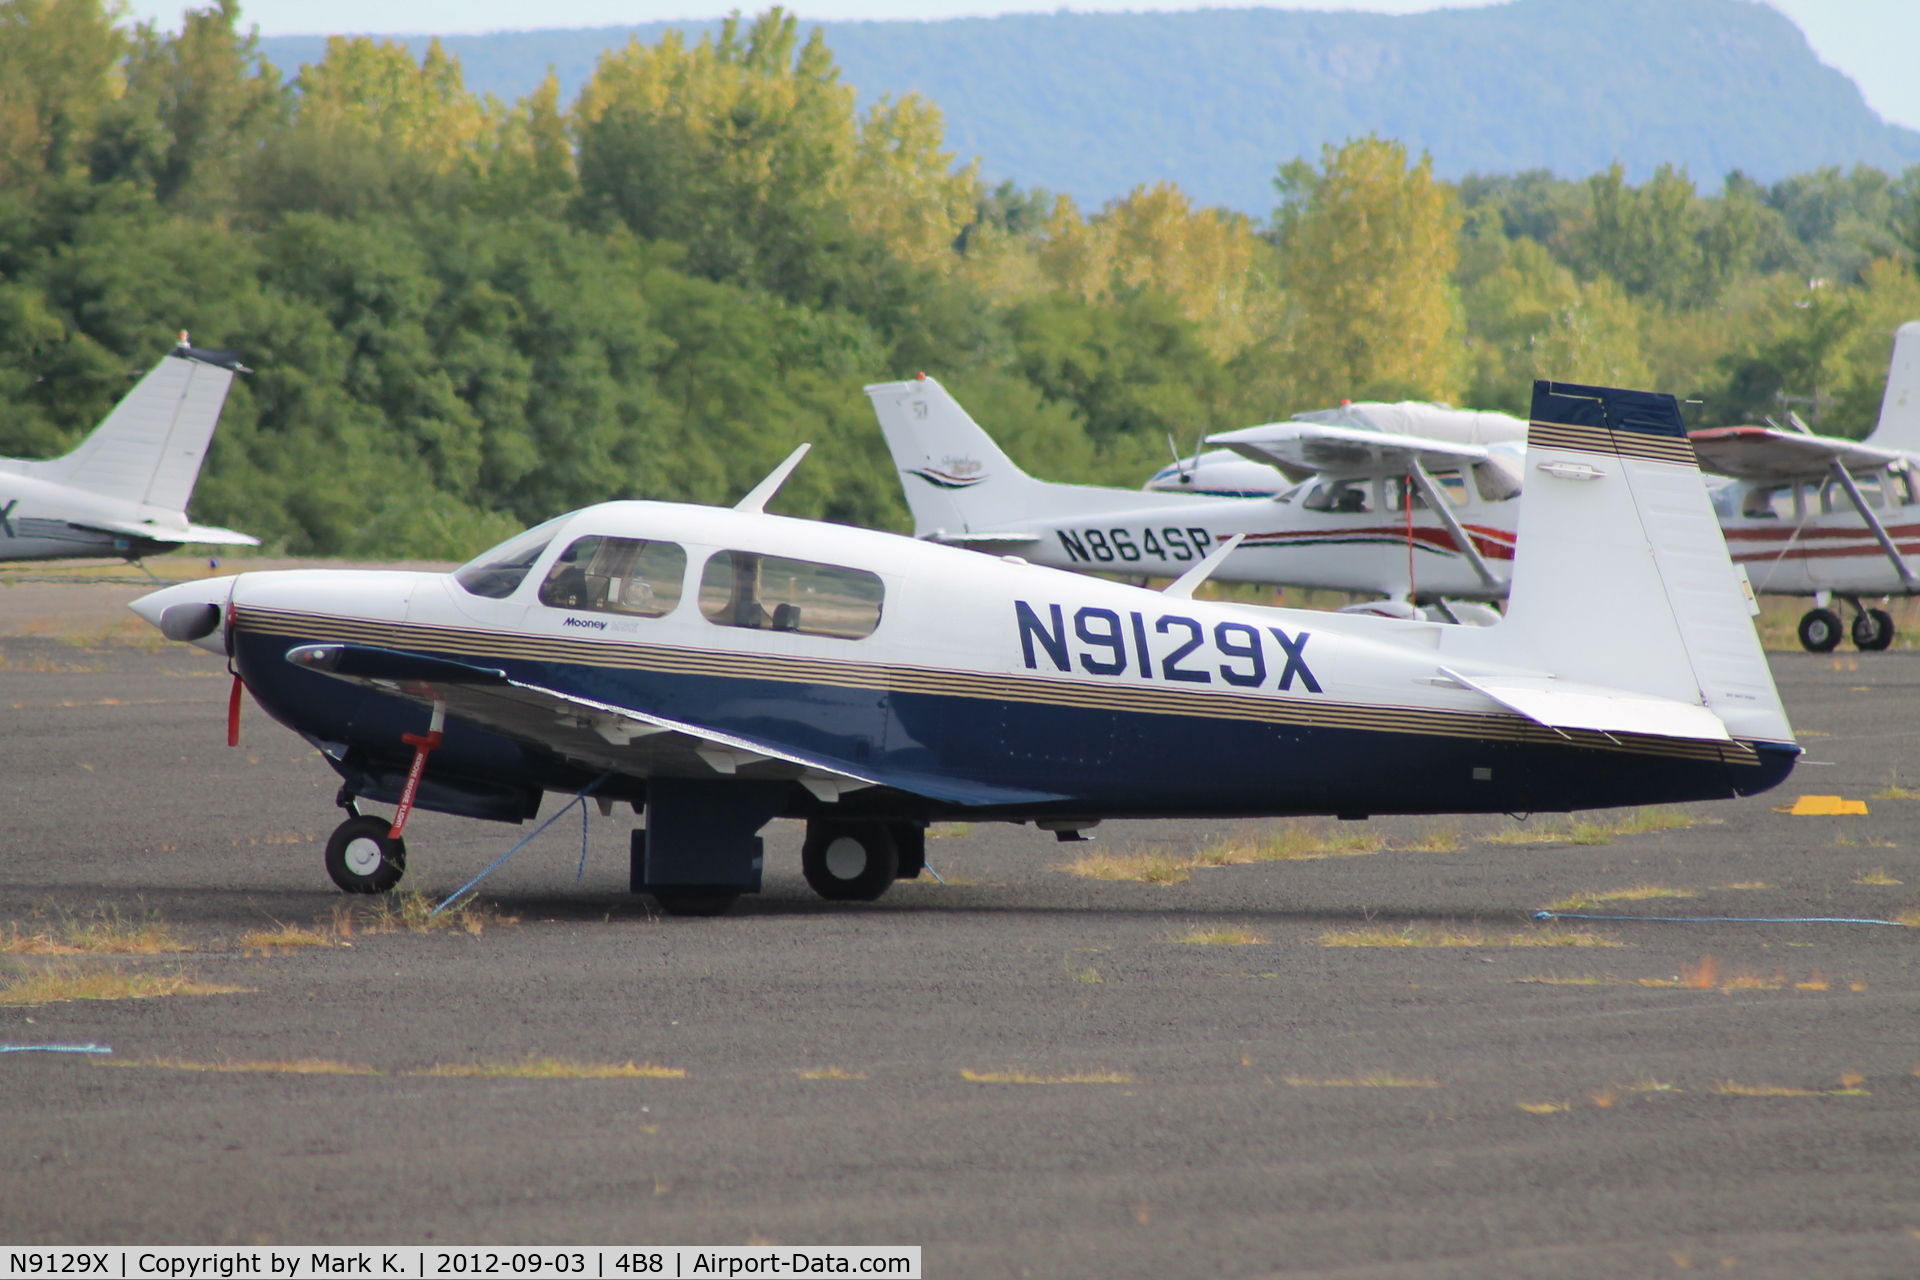 N9129X, 1994 Mooney M20J 201 C/N 24-3347, N9129X parked at Robertson Field after a flight from Tri-Cities (KCZG).